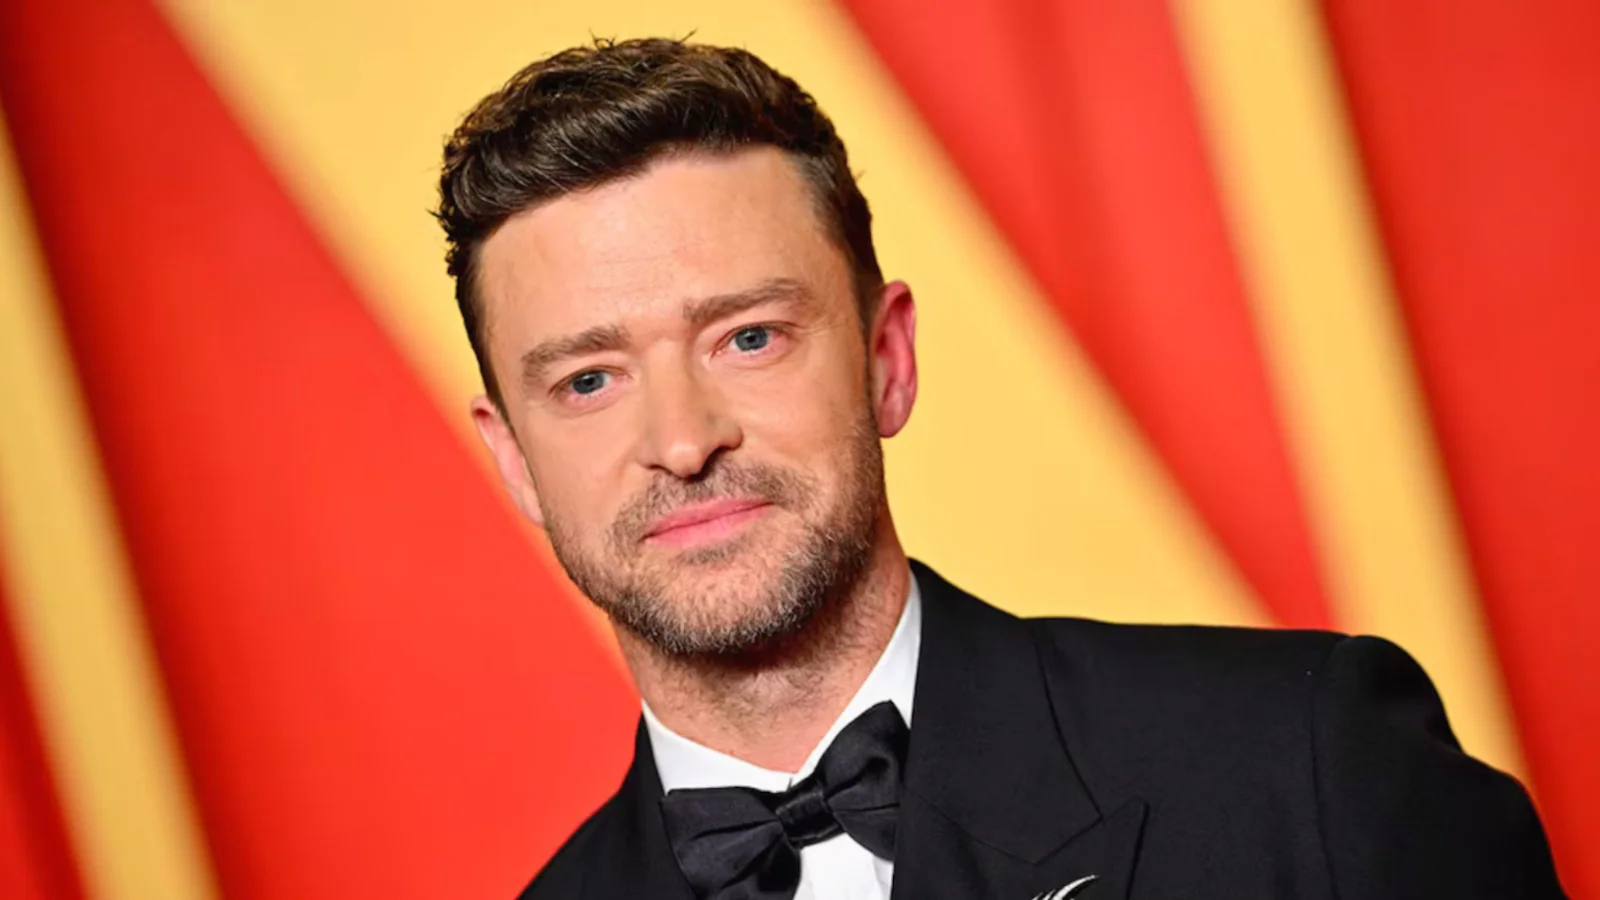 Justin Timberlake's Arrest: All the Information You Need